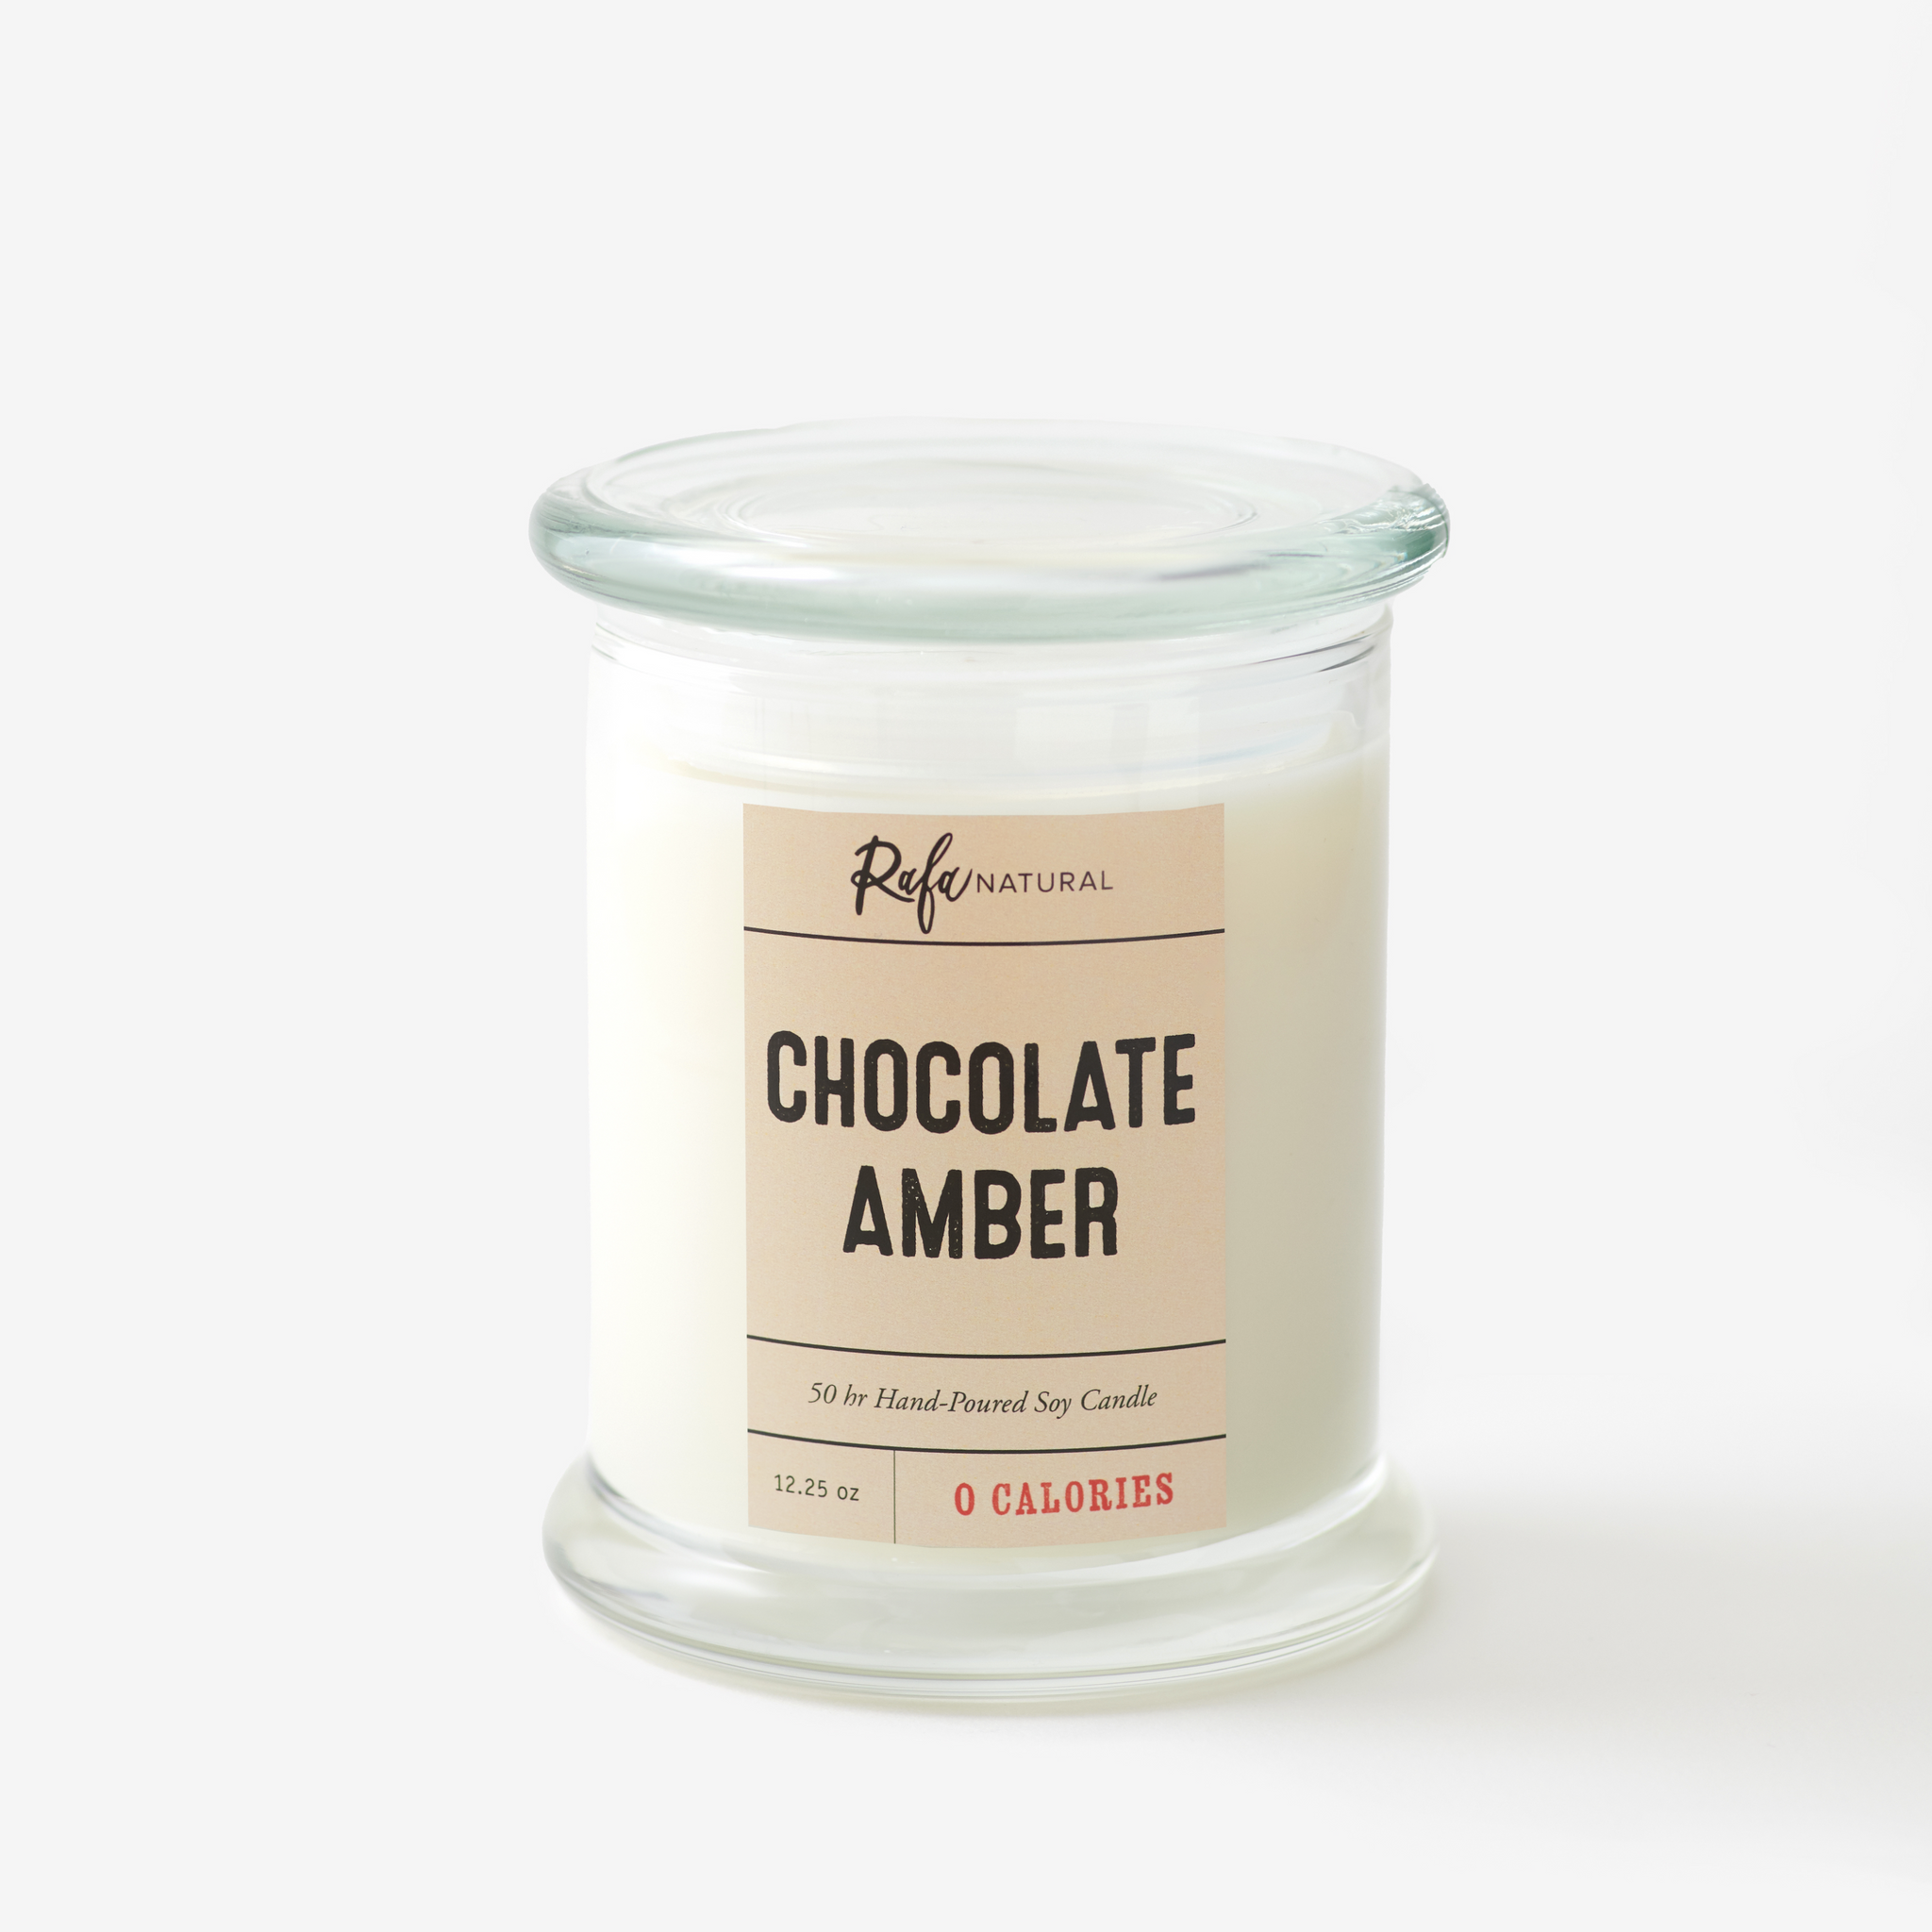 Chocolate Amber 50Hr Soy Candle by Rafa Natural